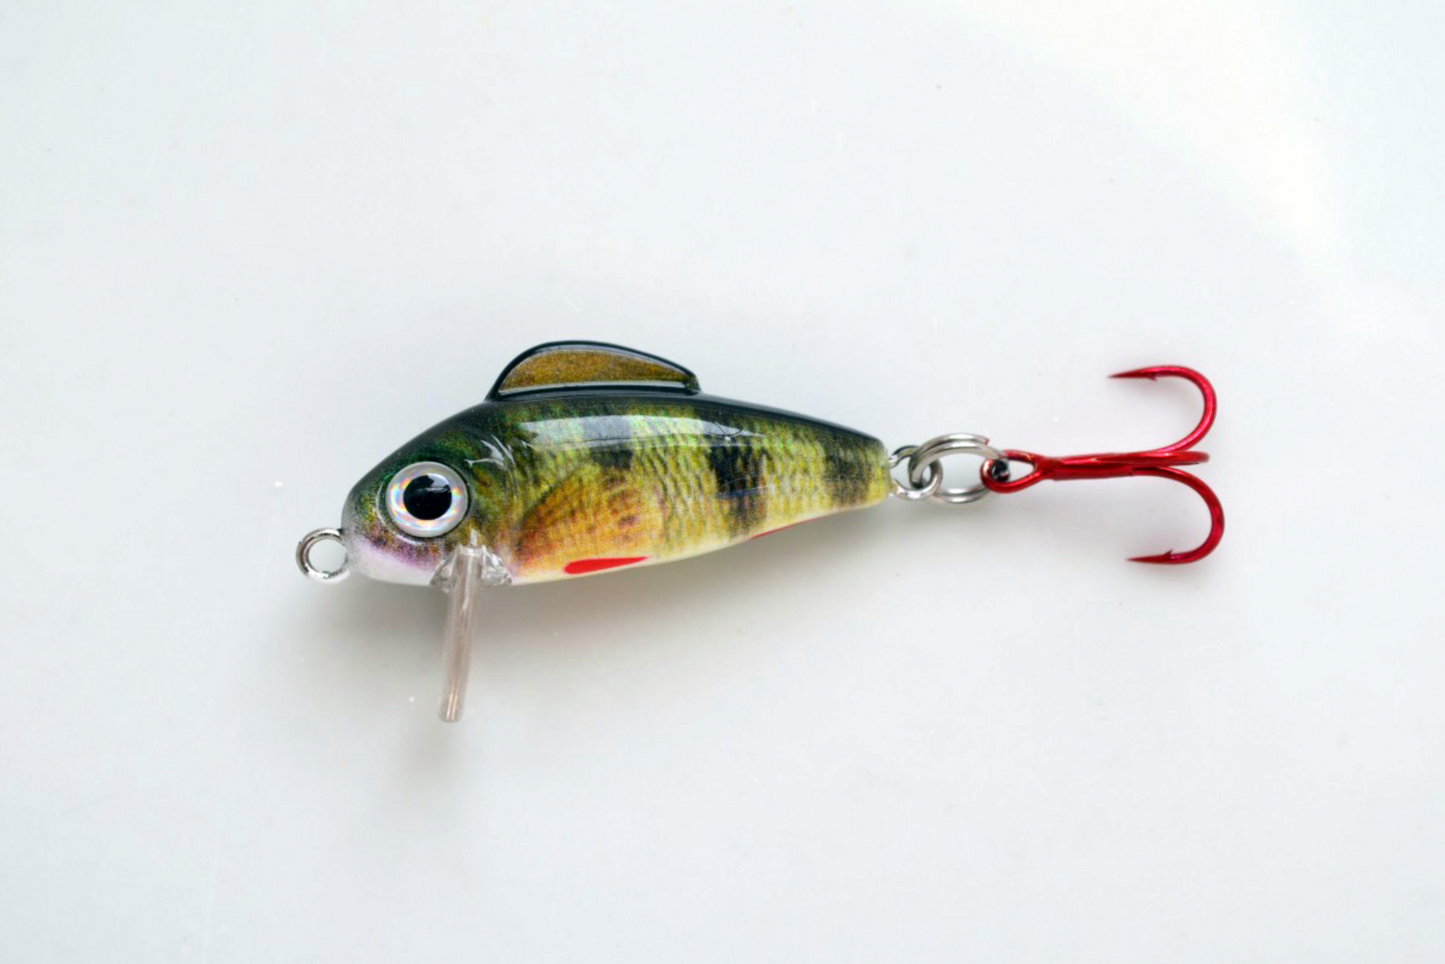 Bullet Lures - Bullet Minnow (Redfin)